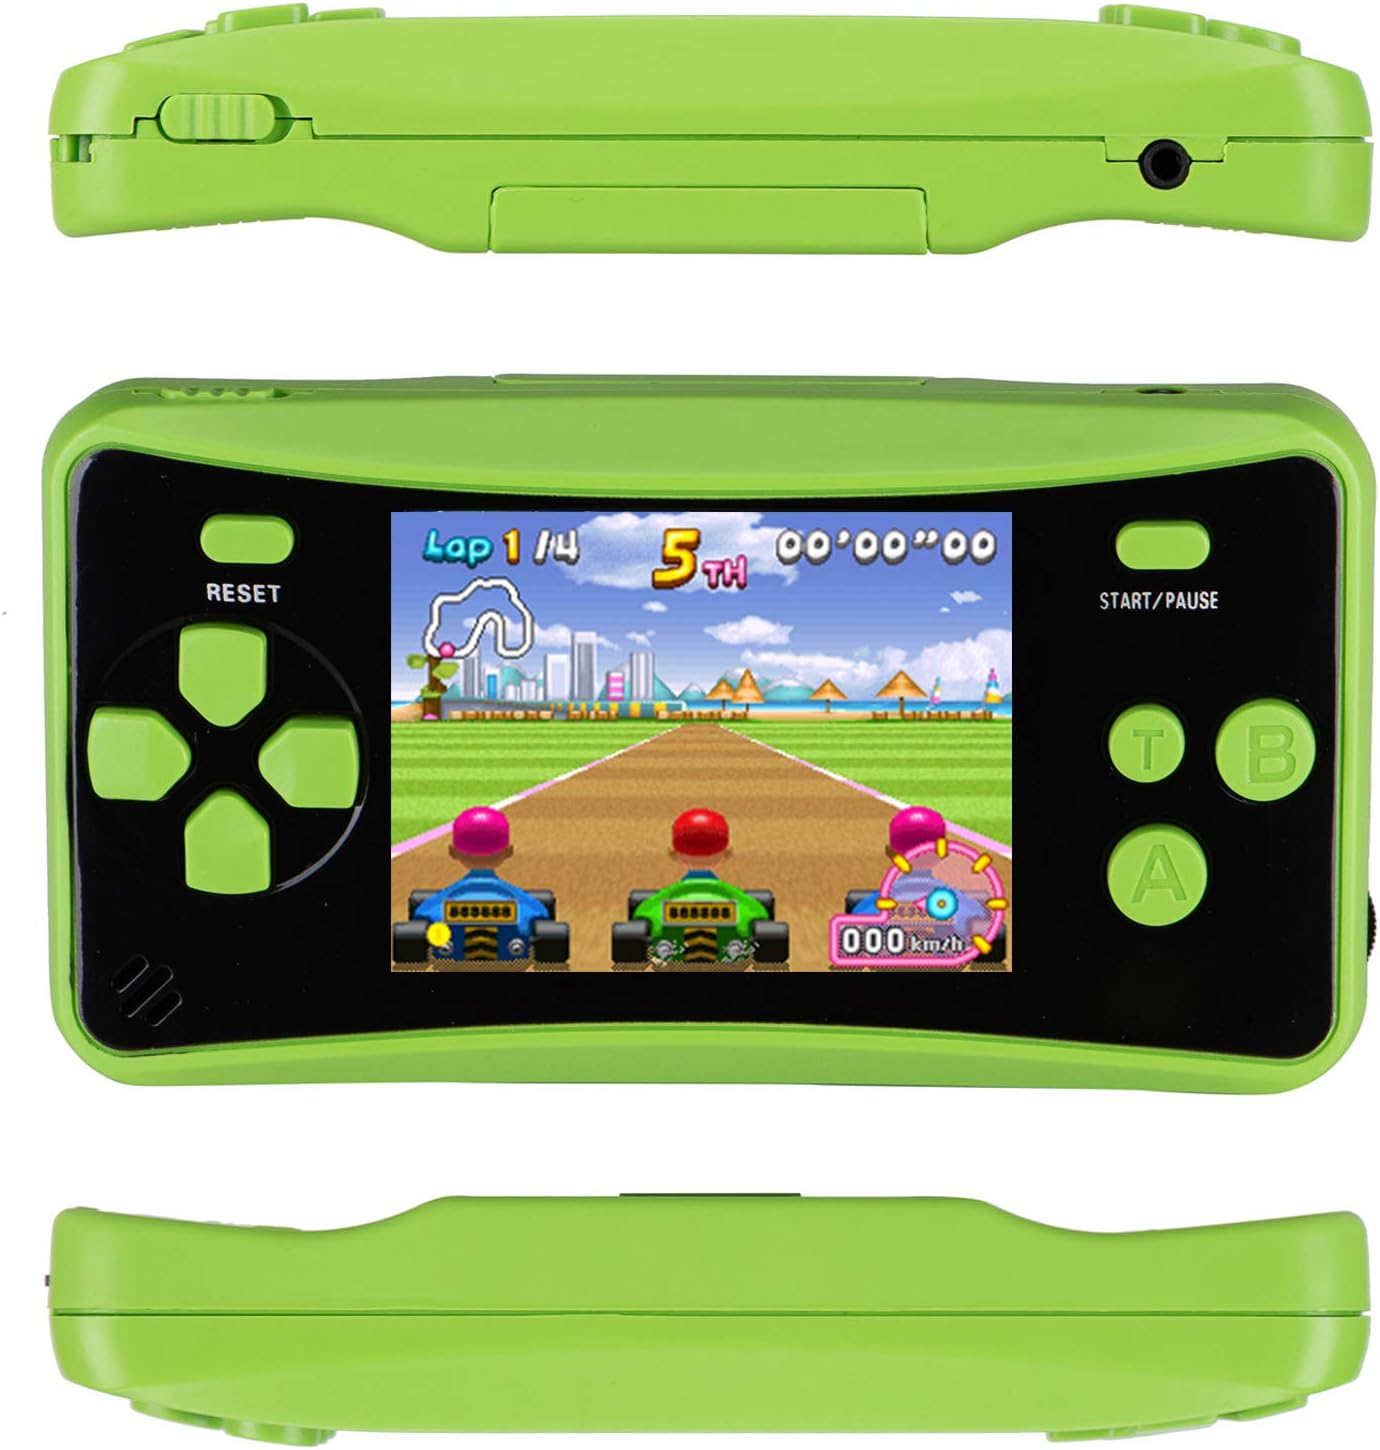 HigoKids Handheld Game for Kids Portable Retro Video Game Player Built-in 182 Classic Games 2.5 inches LCD Screen Family Recreation Arcade Gaming Mechanism Birthday Present for Children-Rose red